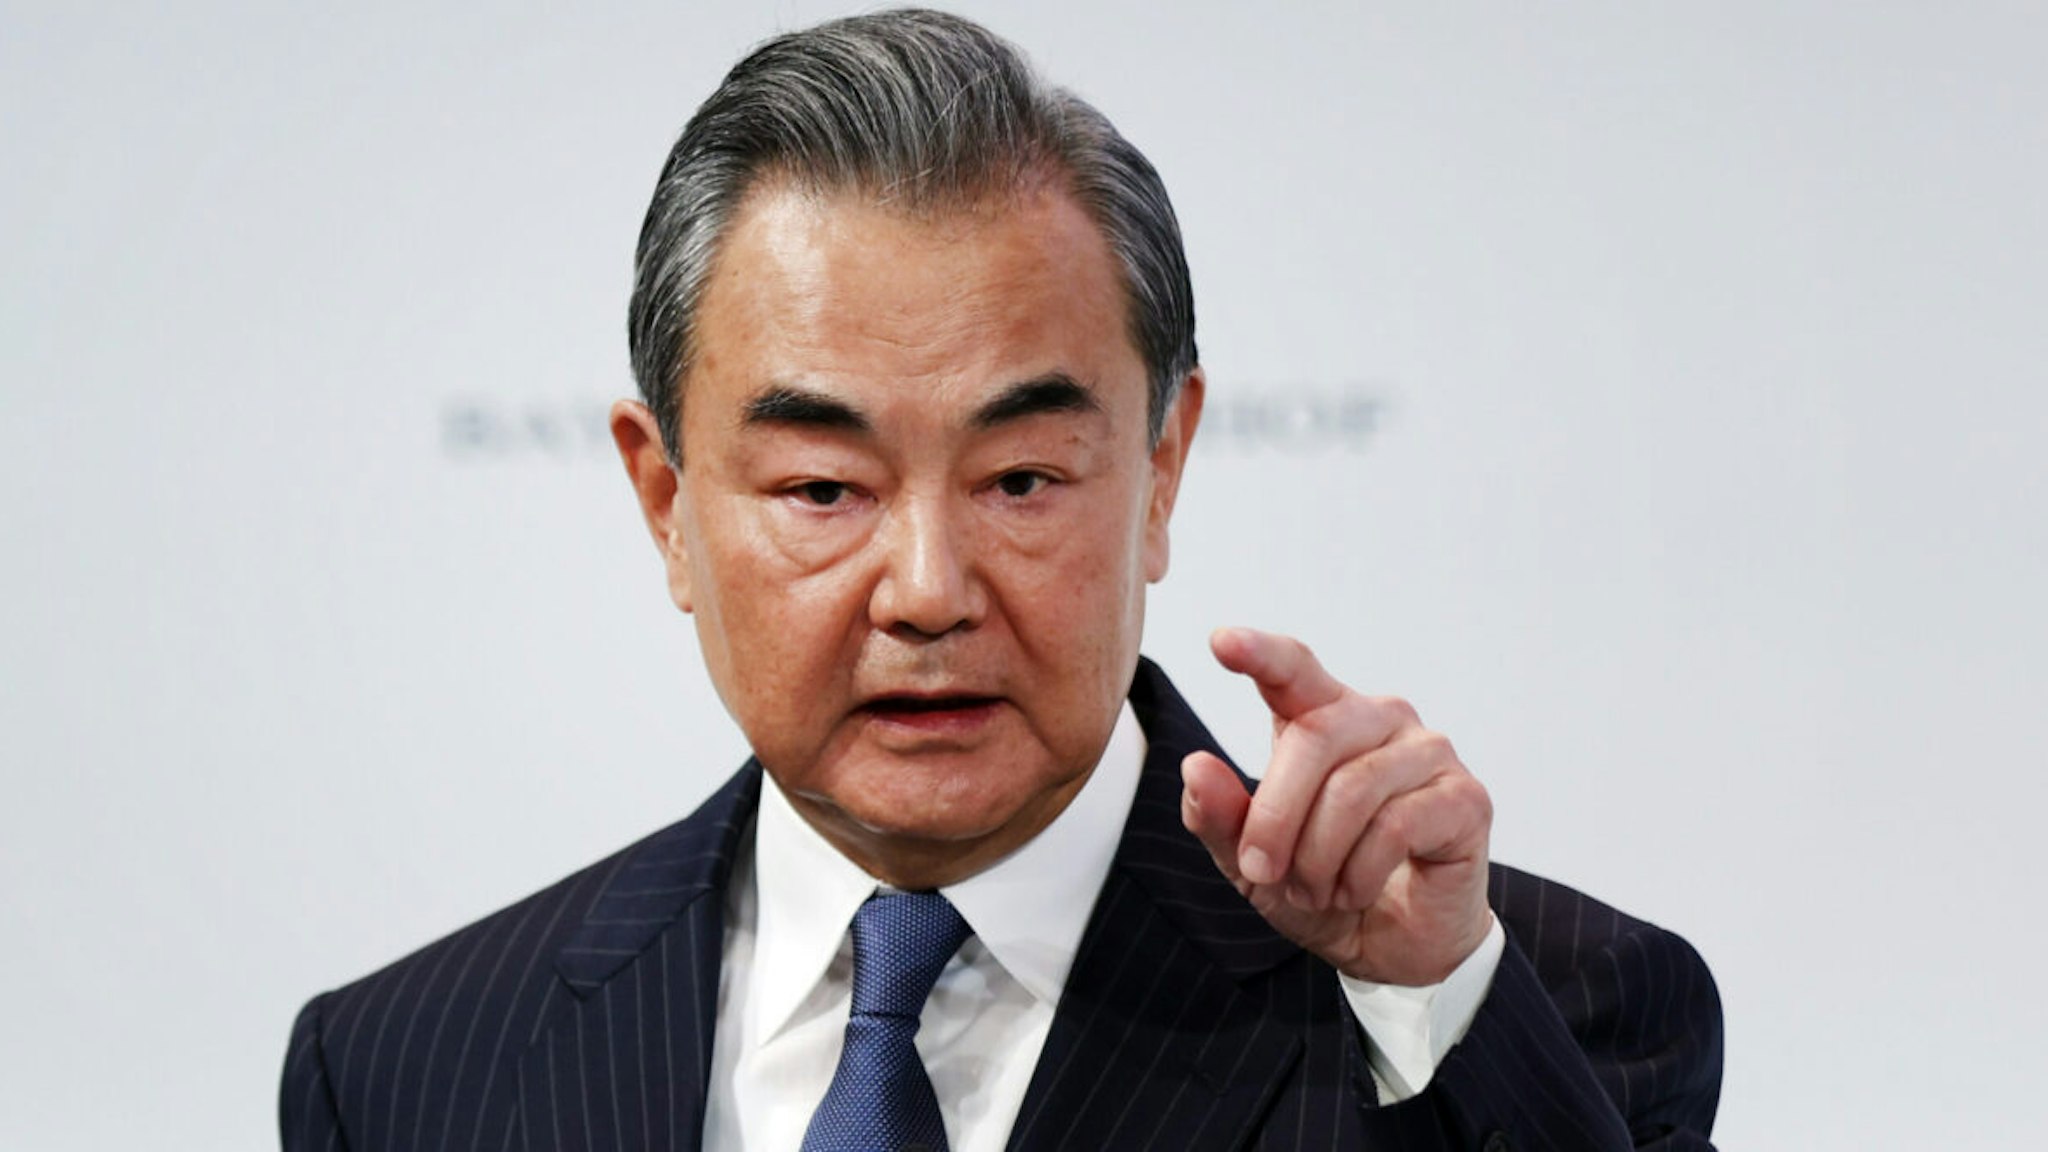 MUNICH, GERMANY - FEBRUARY 18: Chinese foreign affairs Minister Wang Yi speaks during the 2023 Munich Security Conference (MSC) on February 18, 2023 in Munich, Germany. The Munich Security Conference brings together defence leaders and stakeholders from around the world and is taking place February 17-19. Russia's ongoing war in Ukraine is dominating the agenda.